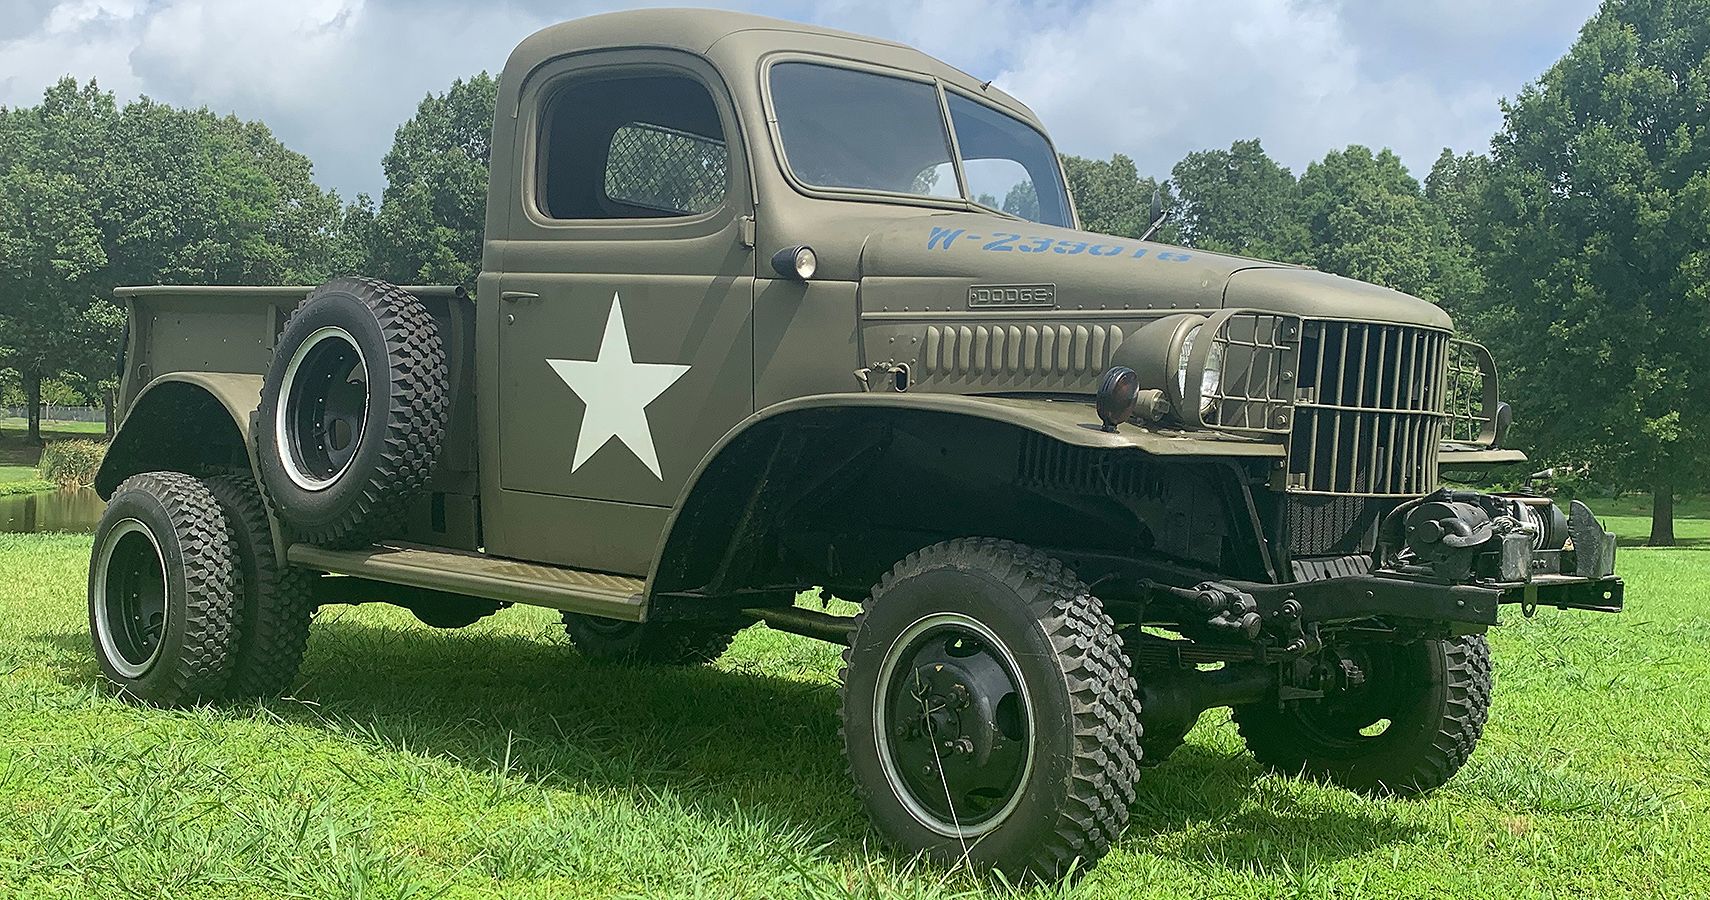 Dodge WC Utility Truck: Approximately $7,000